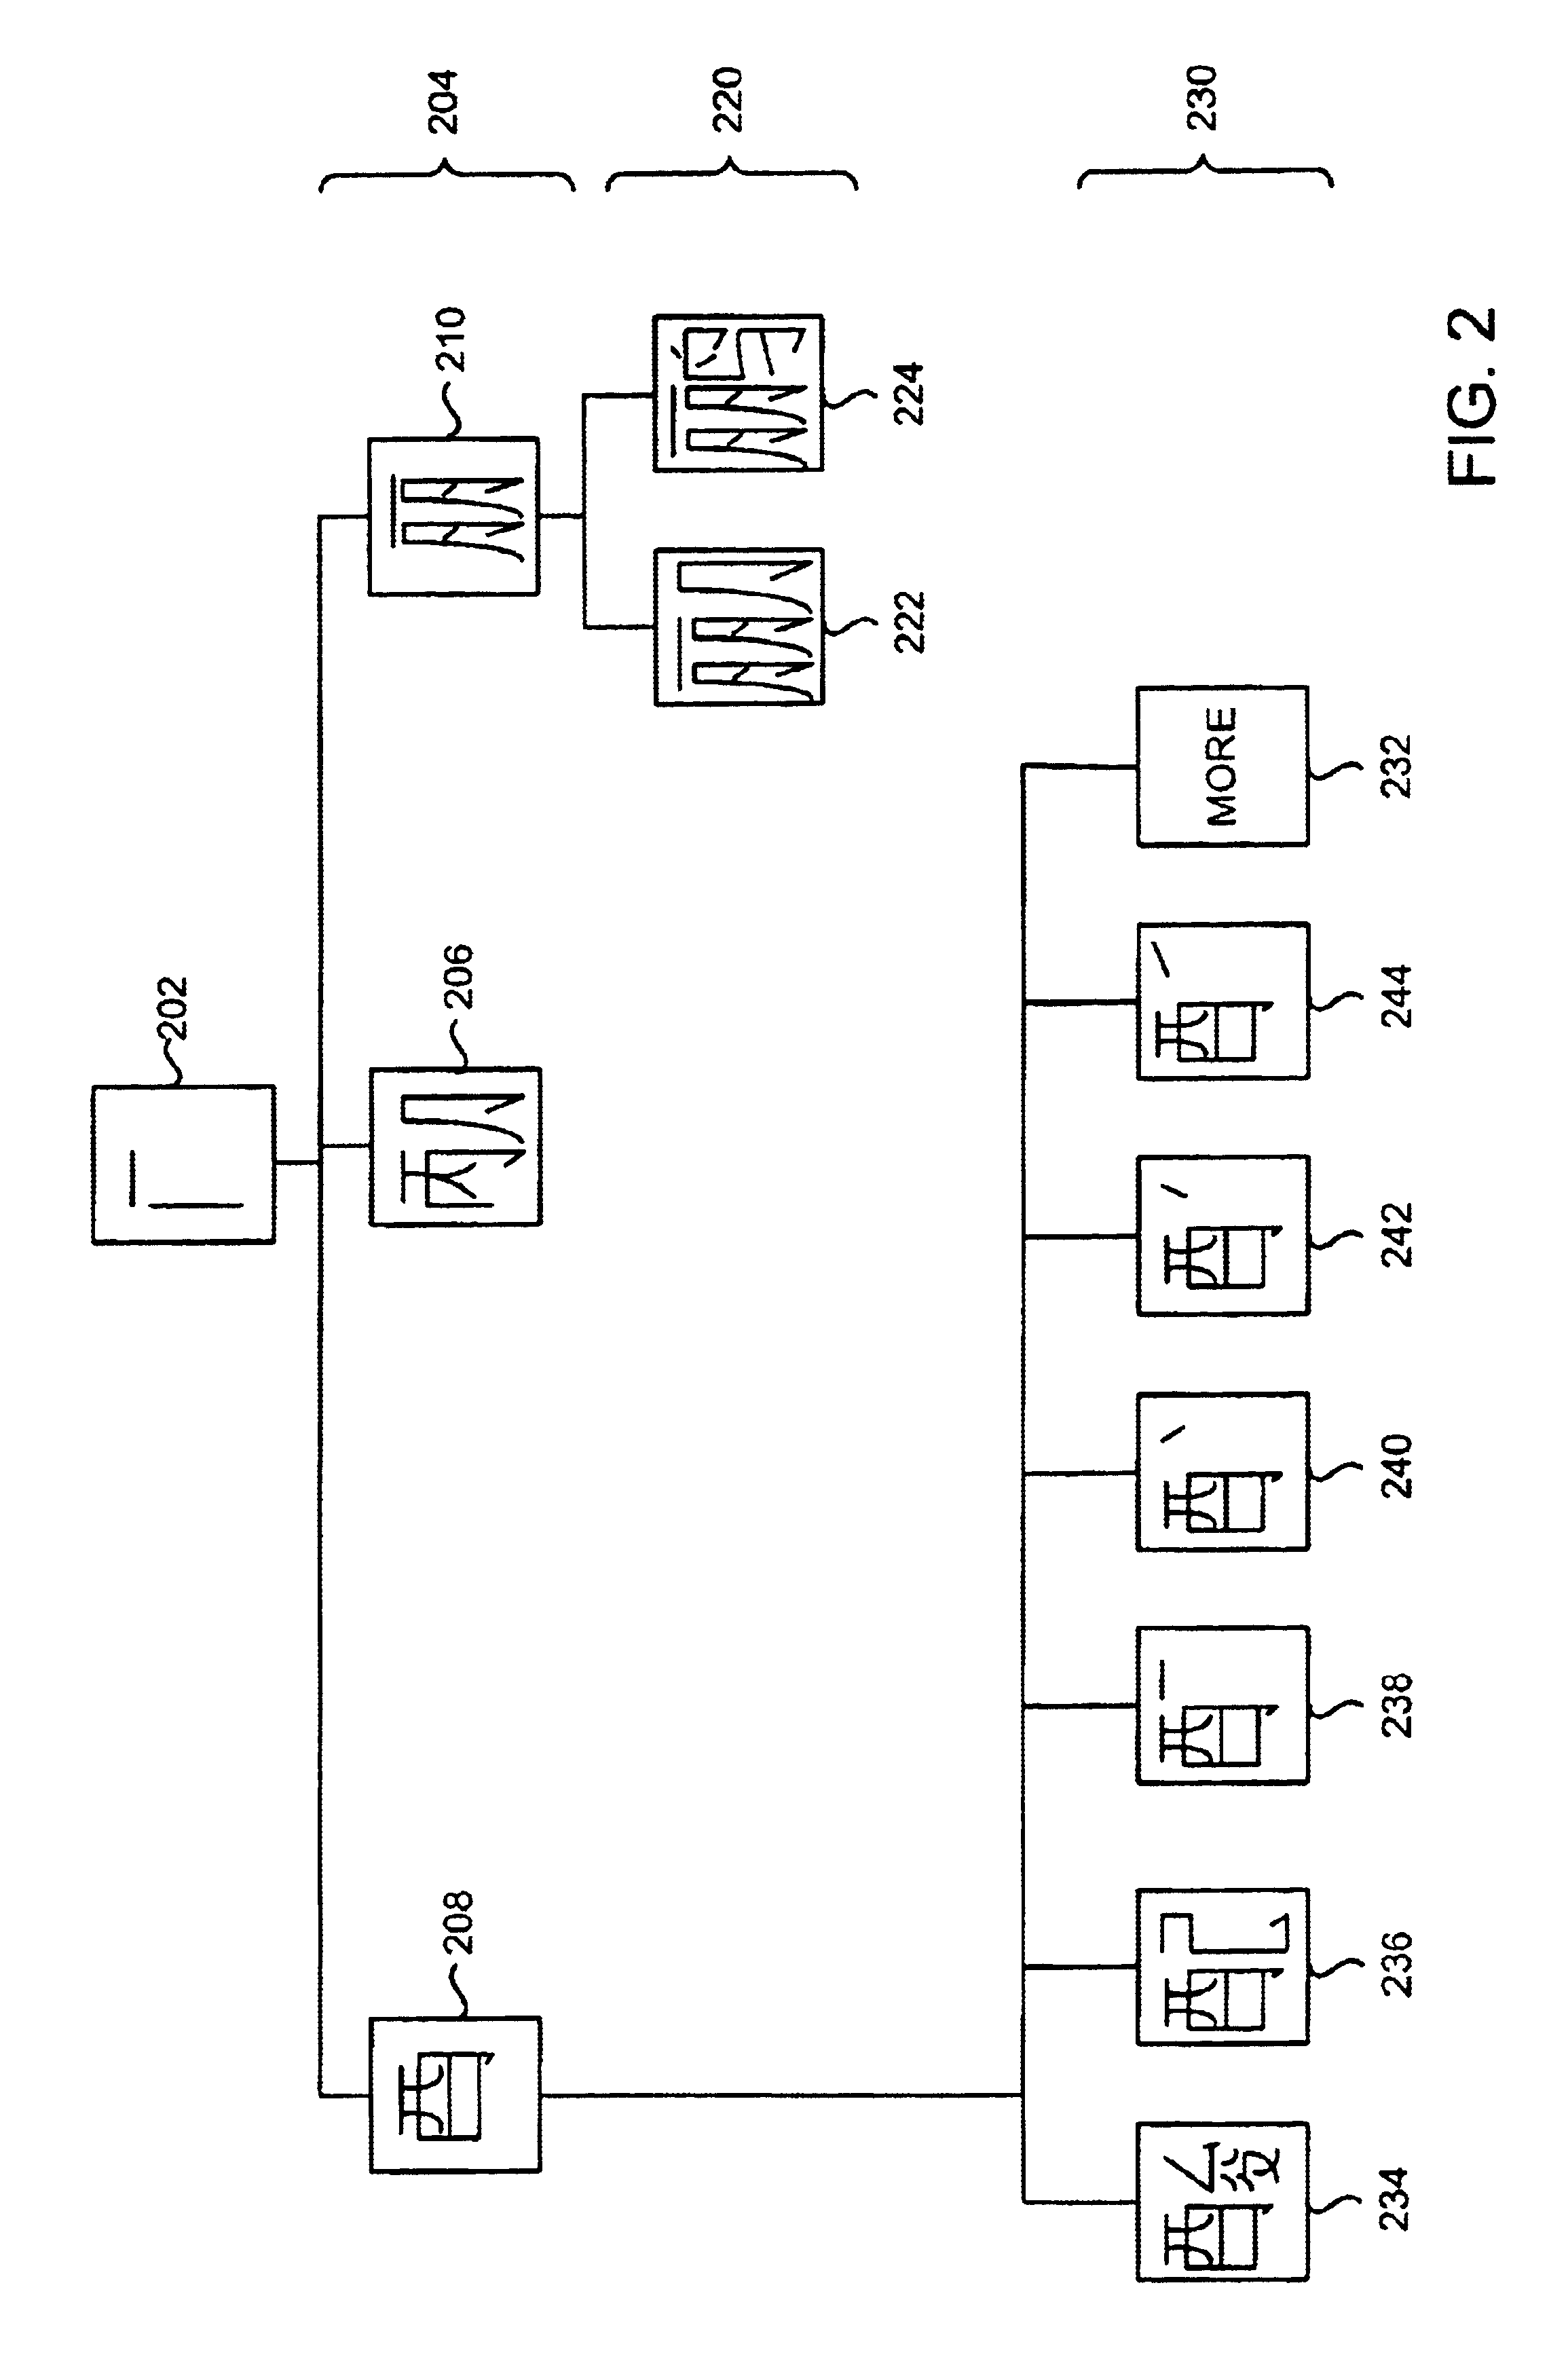 Database engines for processing ideographic characters and methods therefor